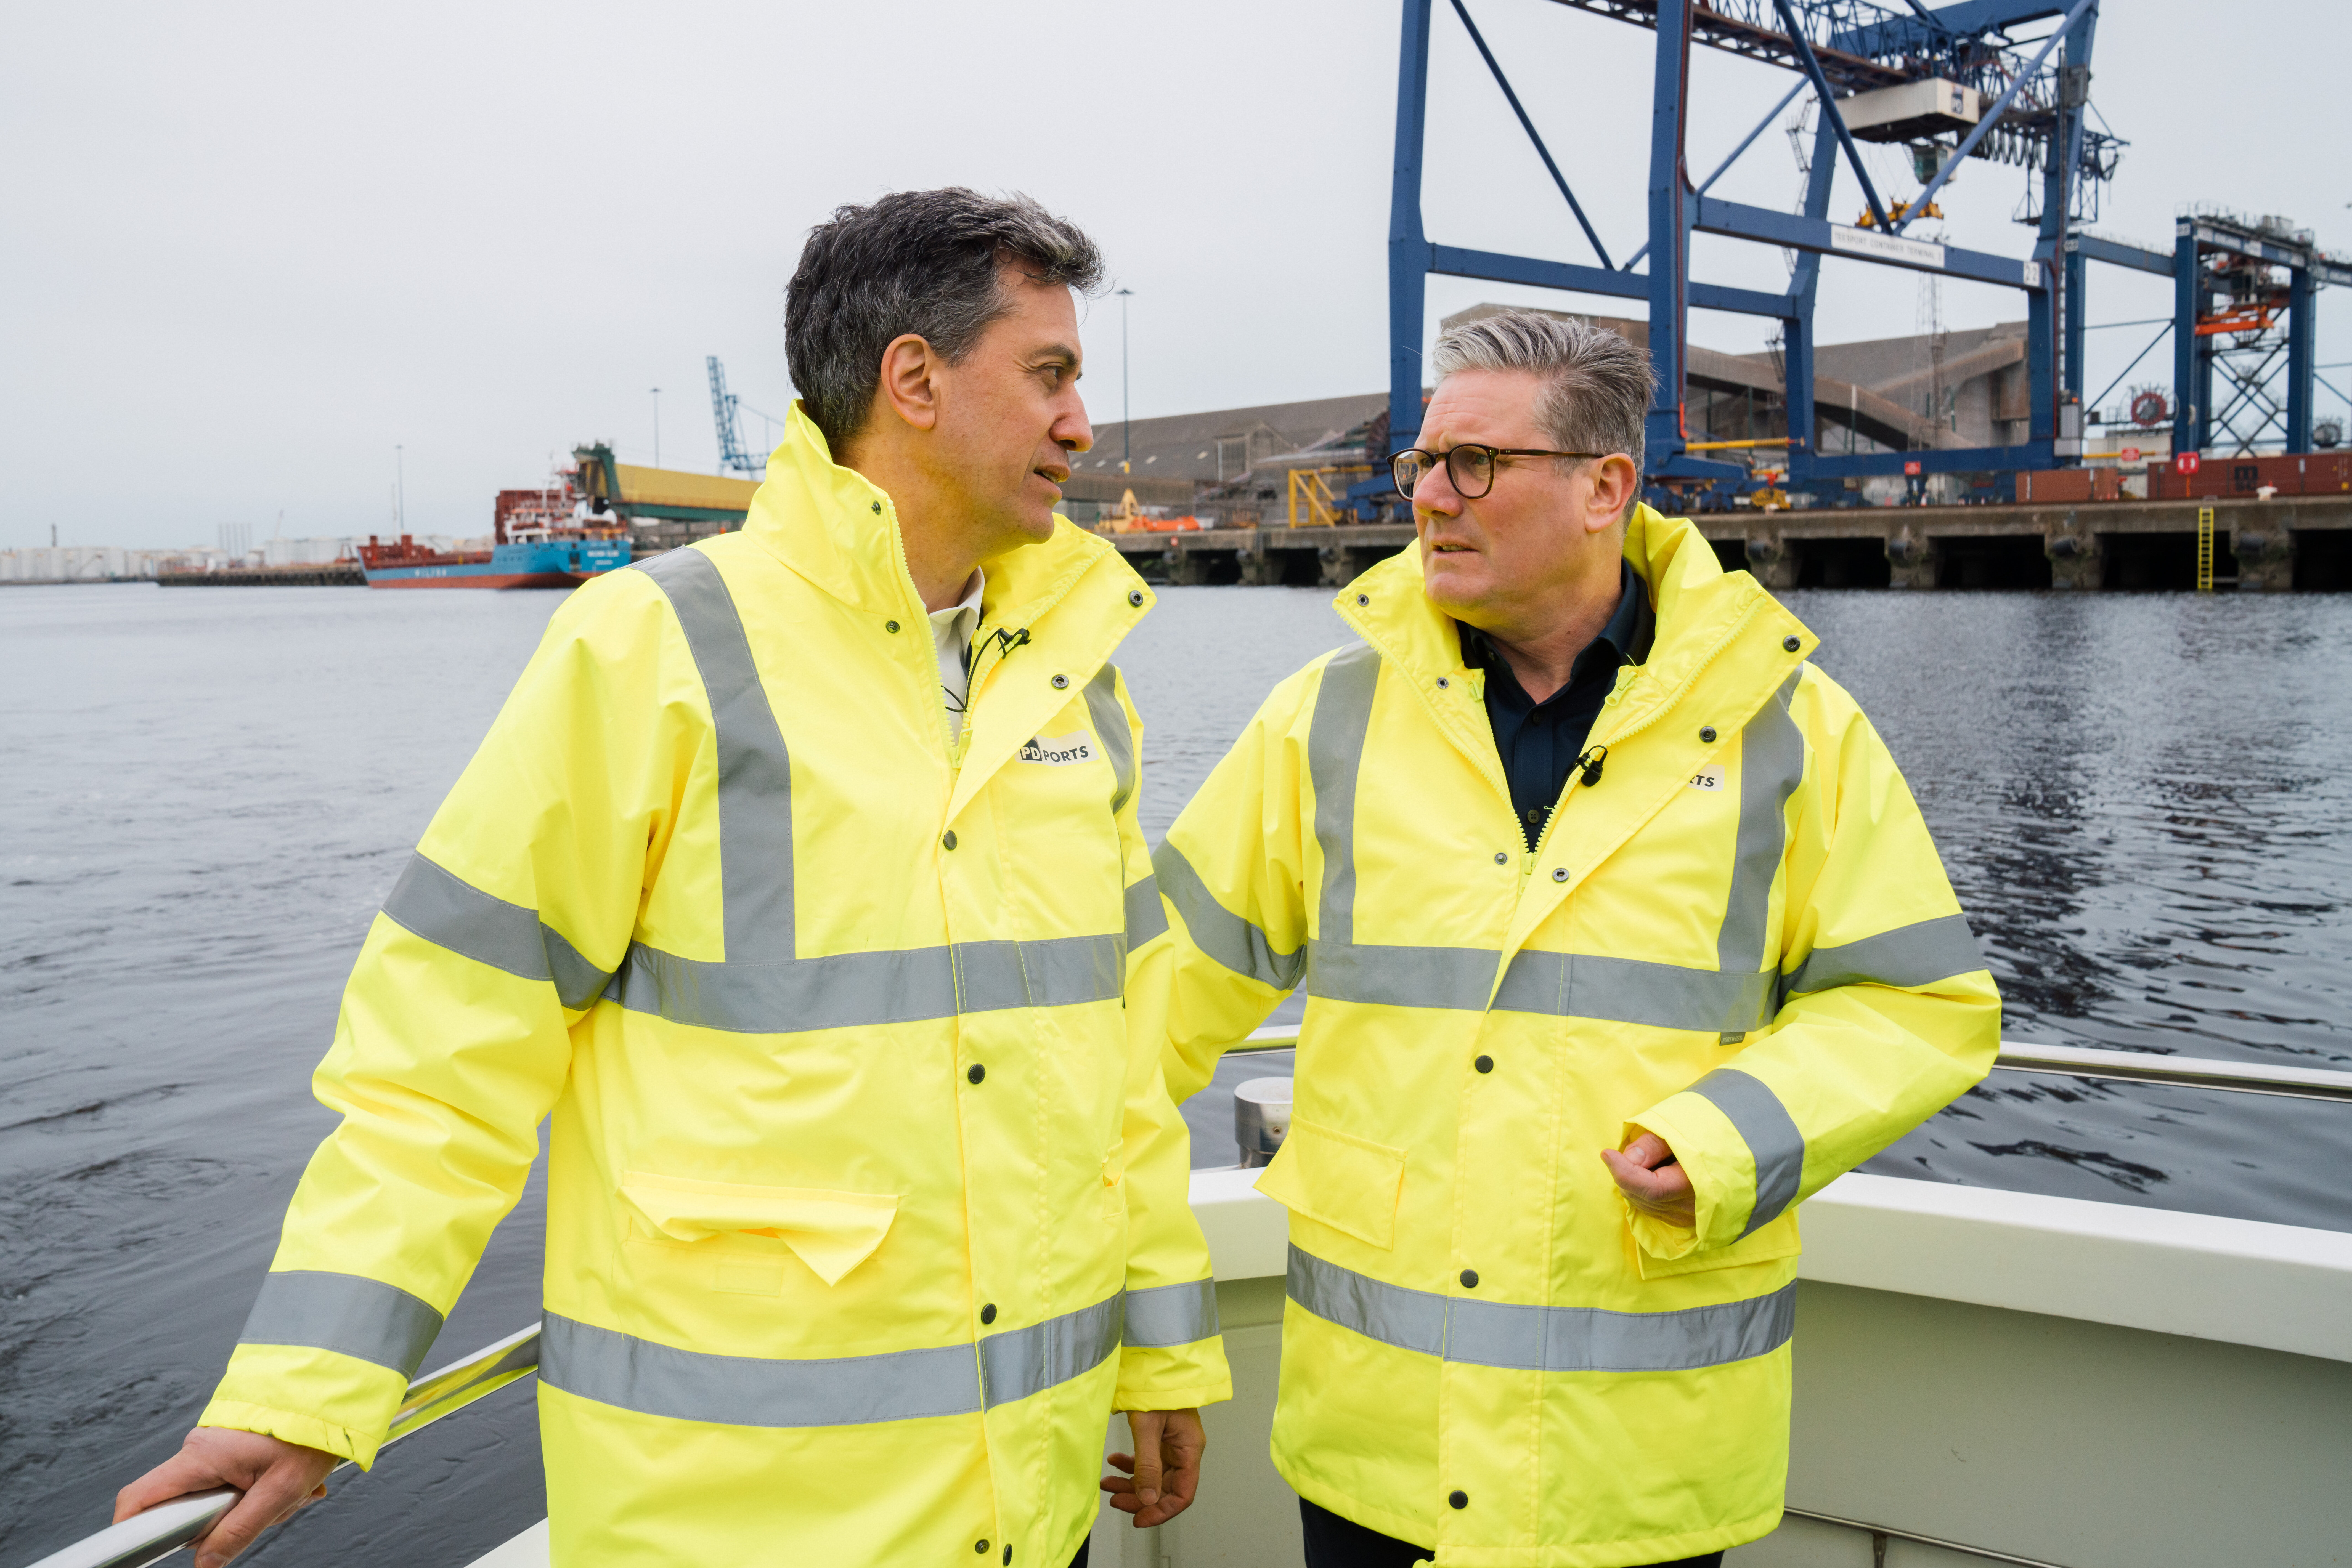 Keir Starmer and Ed Miliband talking to each other at a port, wearing high visibility yellow coats.